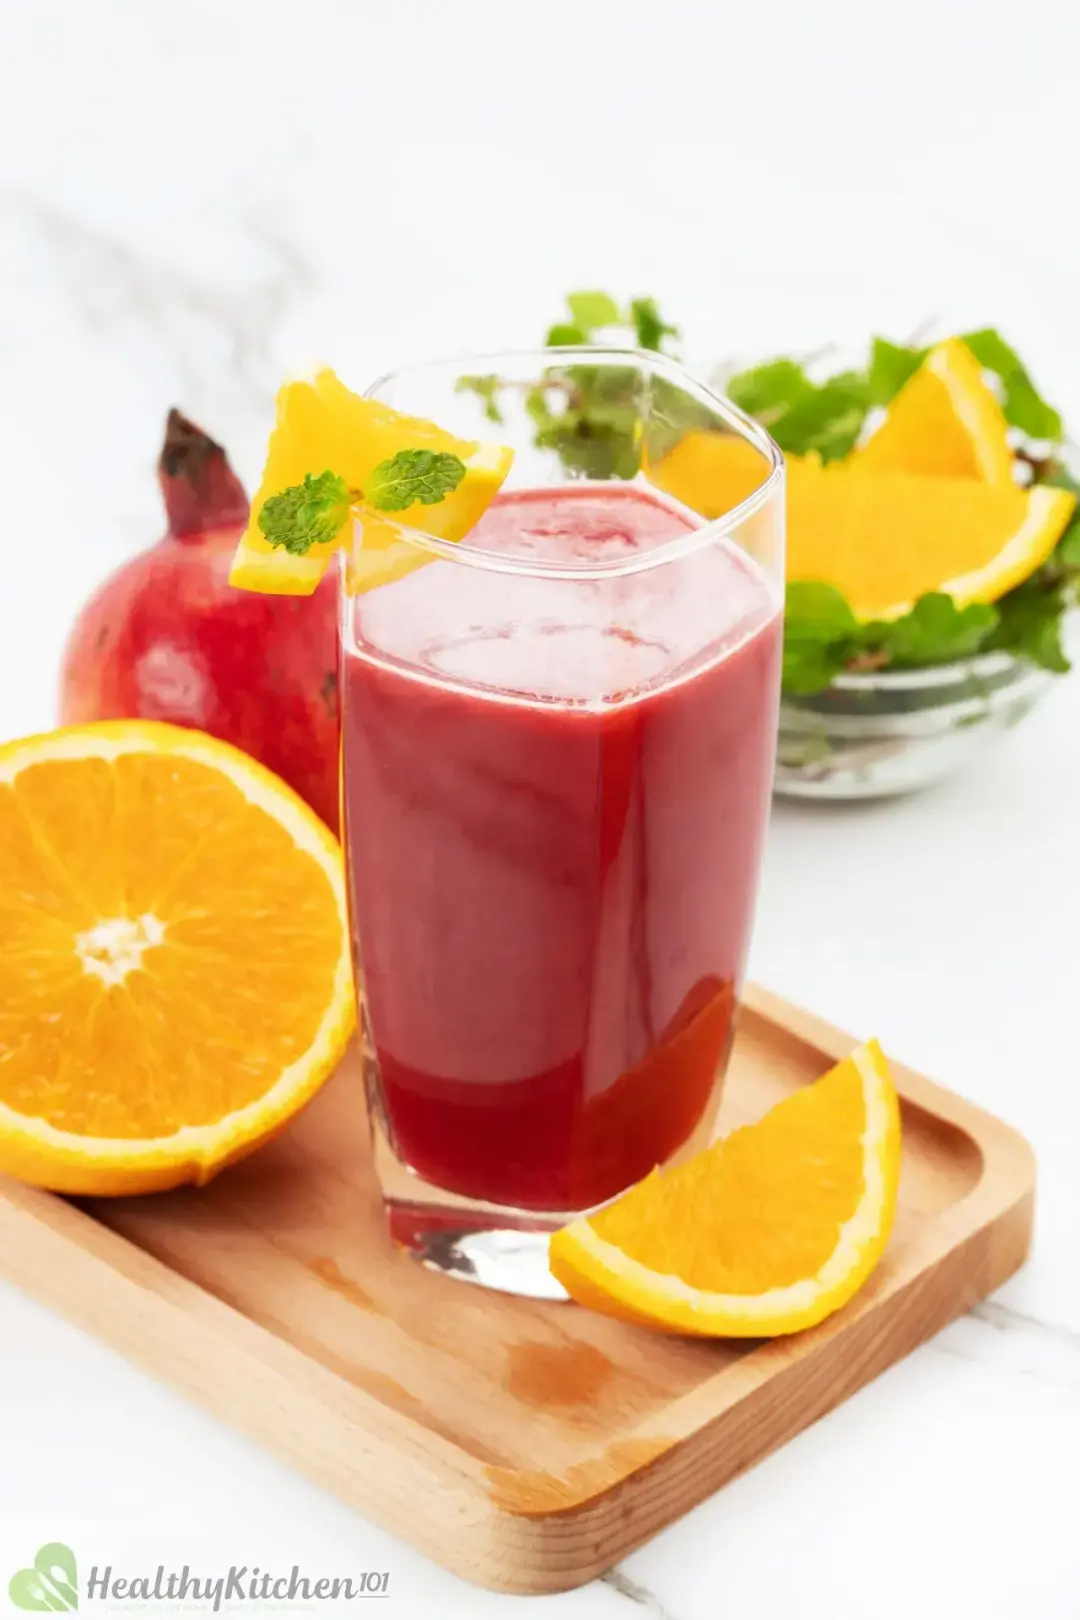 A glass of pomegranate orange juice put on a wooden board with orange slices, with some more fruits in the background